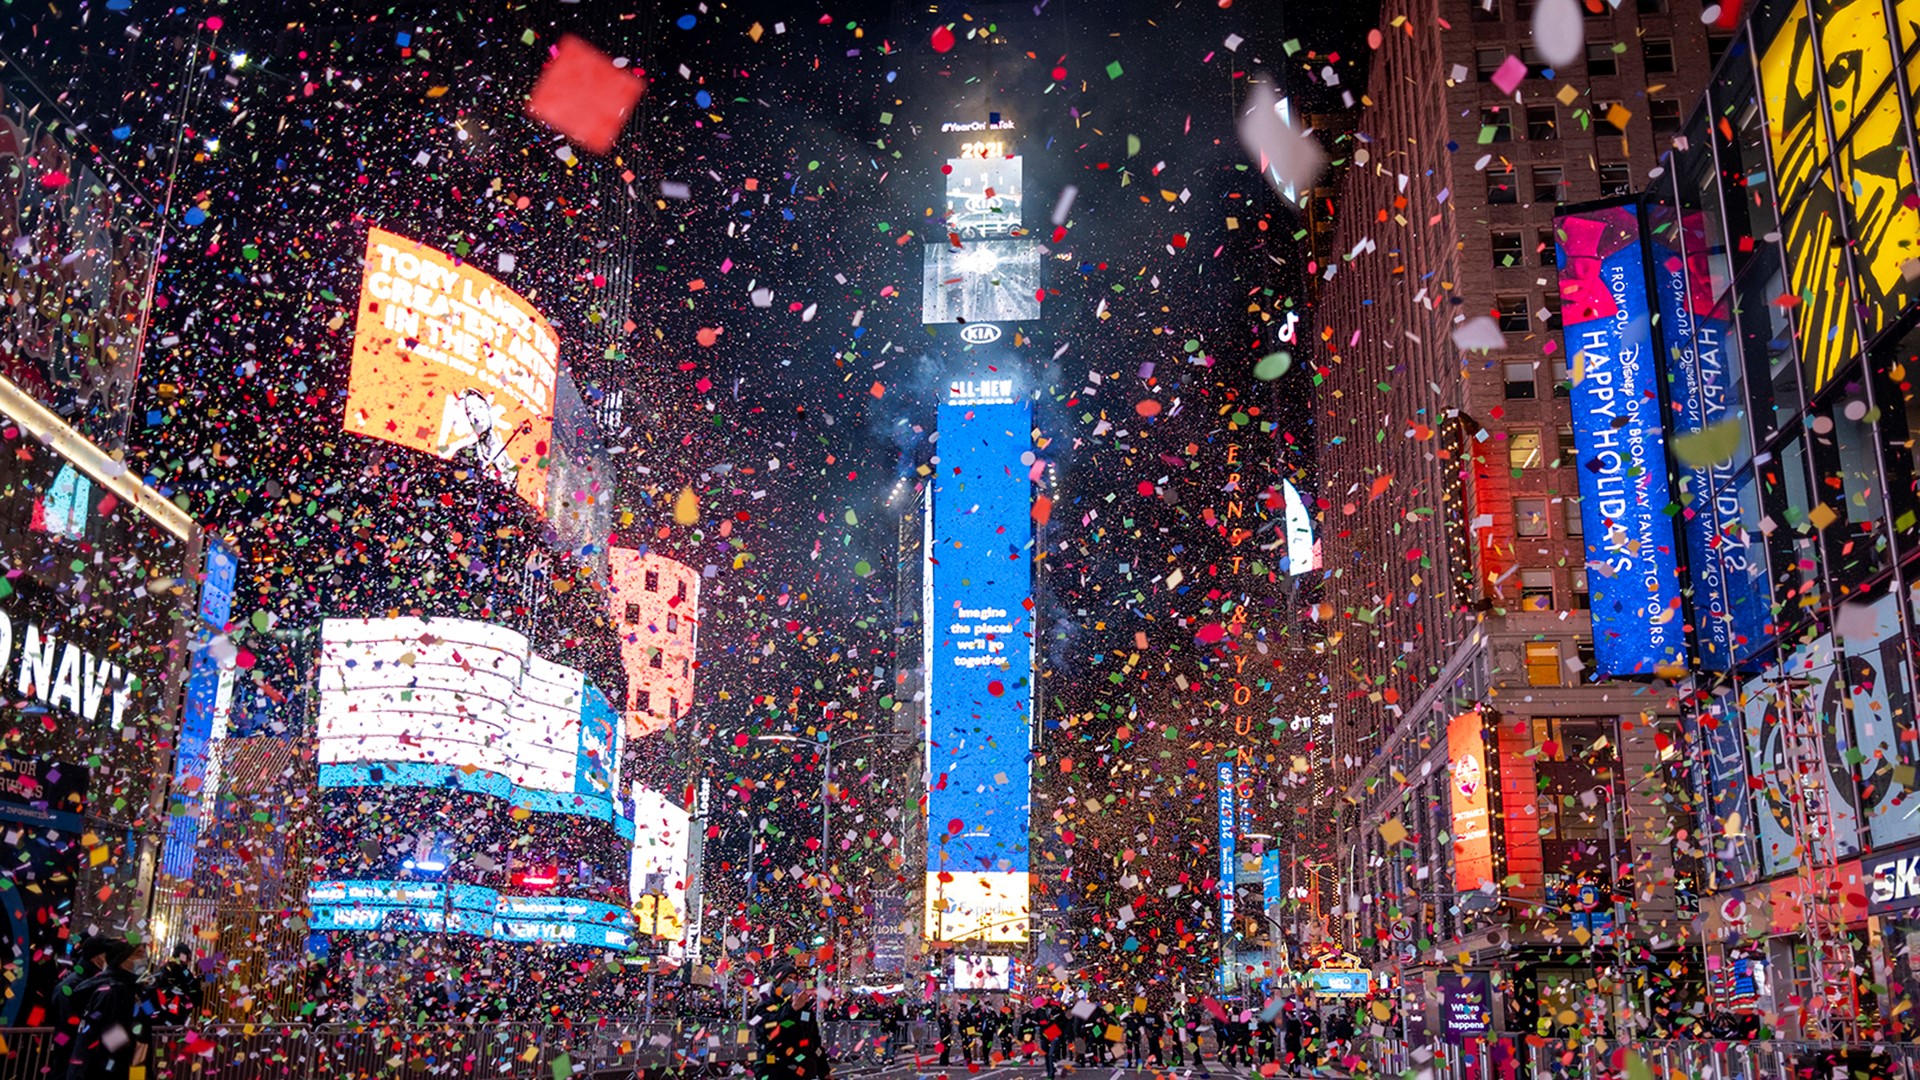 The crystal ball dropped over Times Square in New York City, marking the end of 2020.